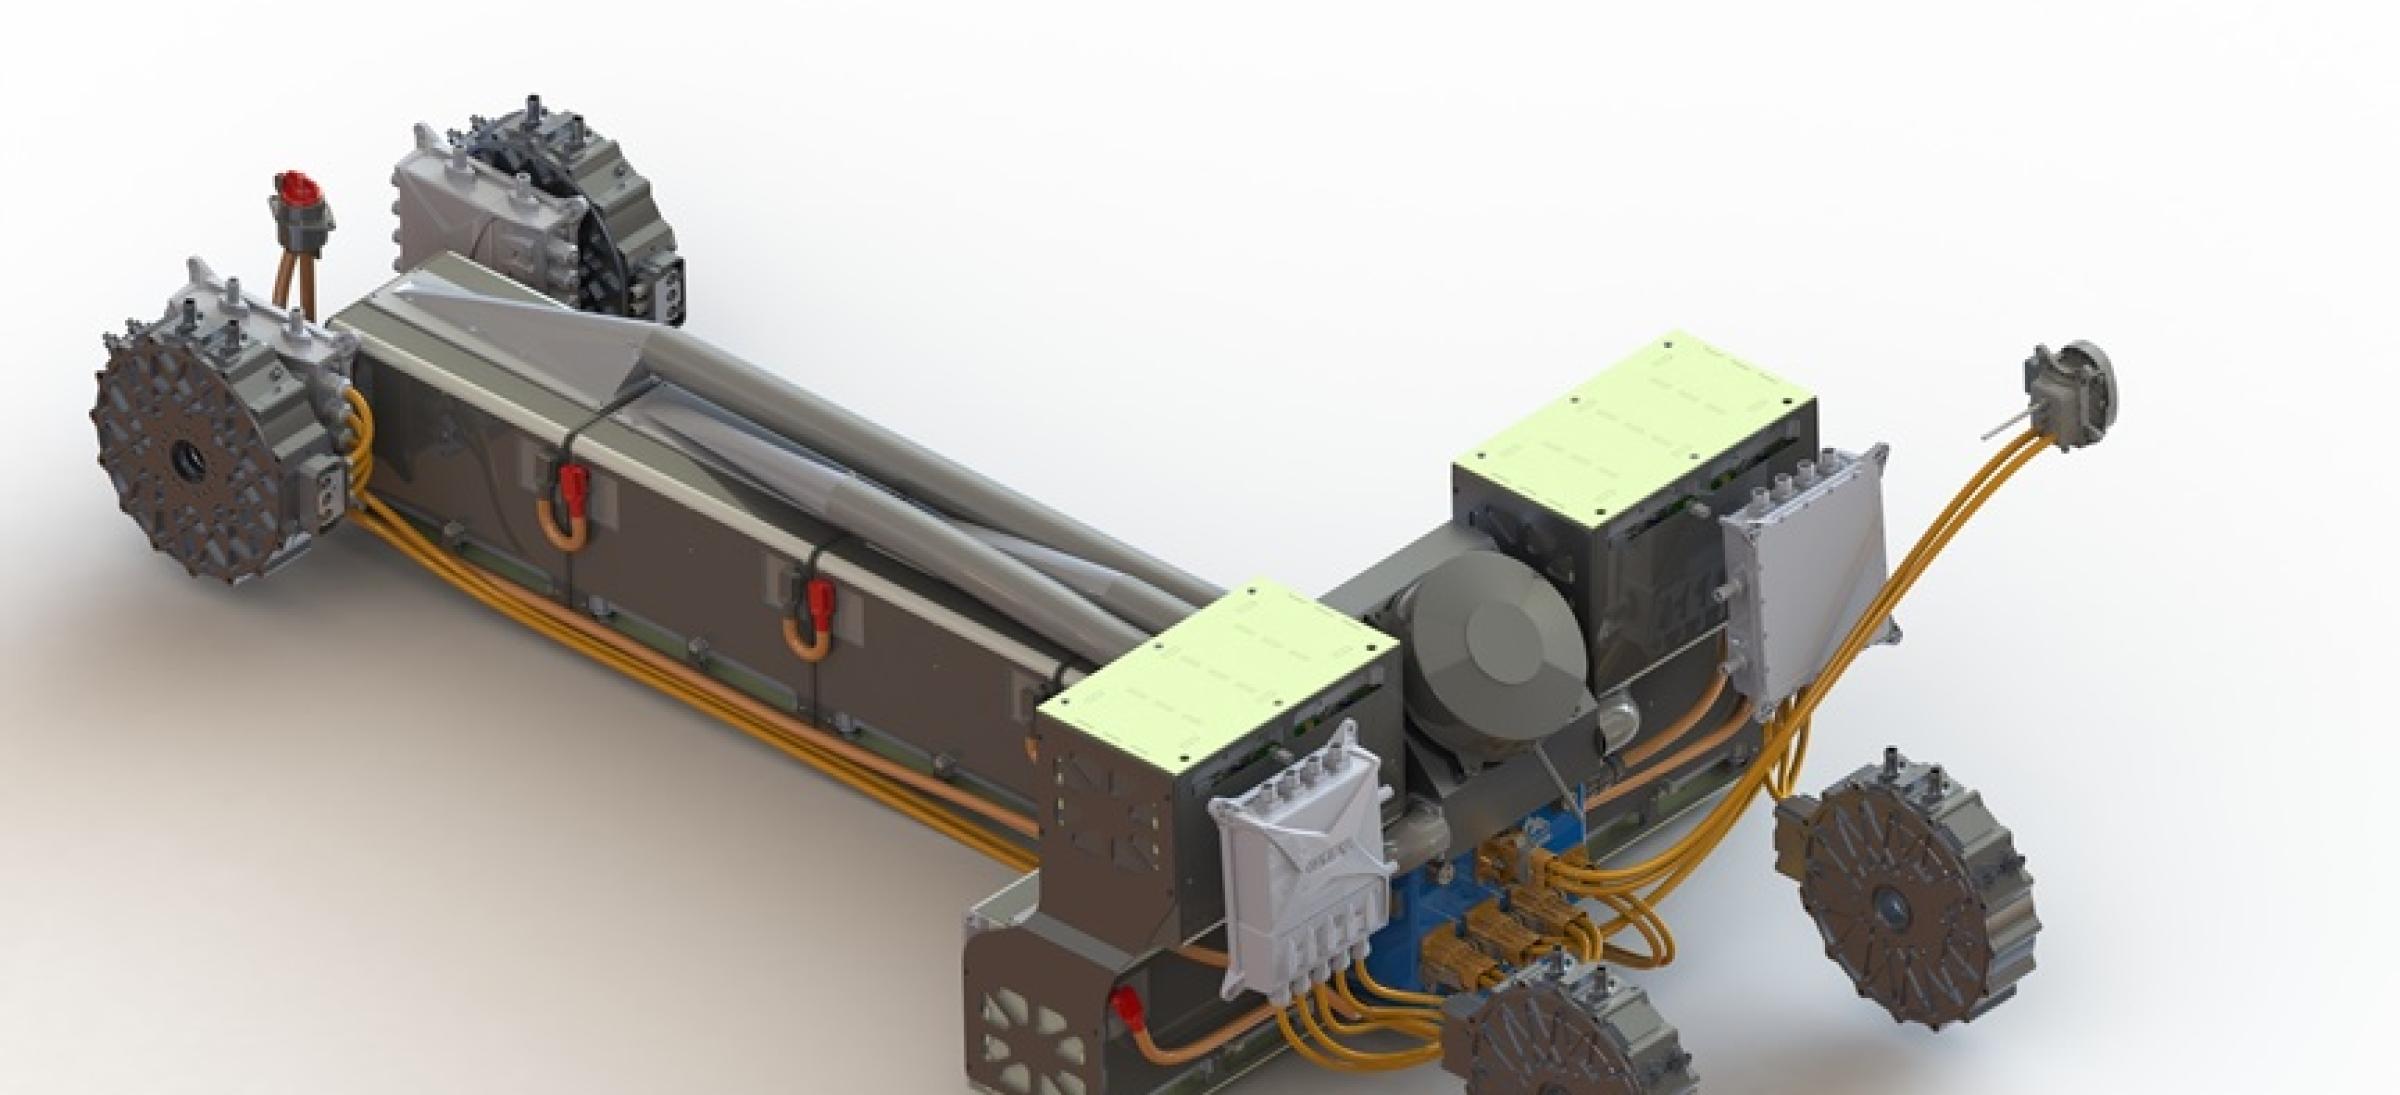 Example of a powertrain